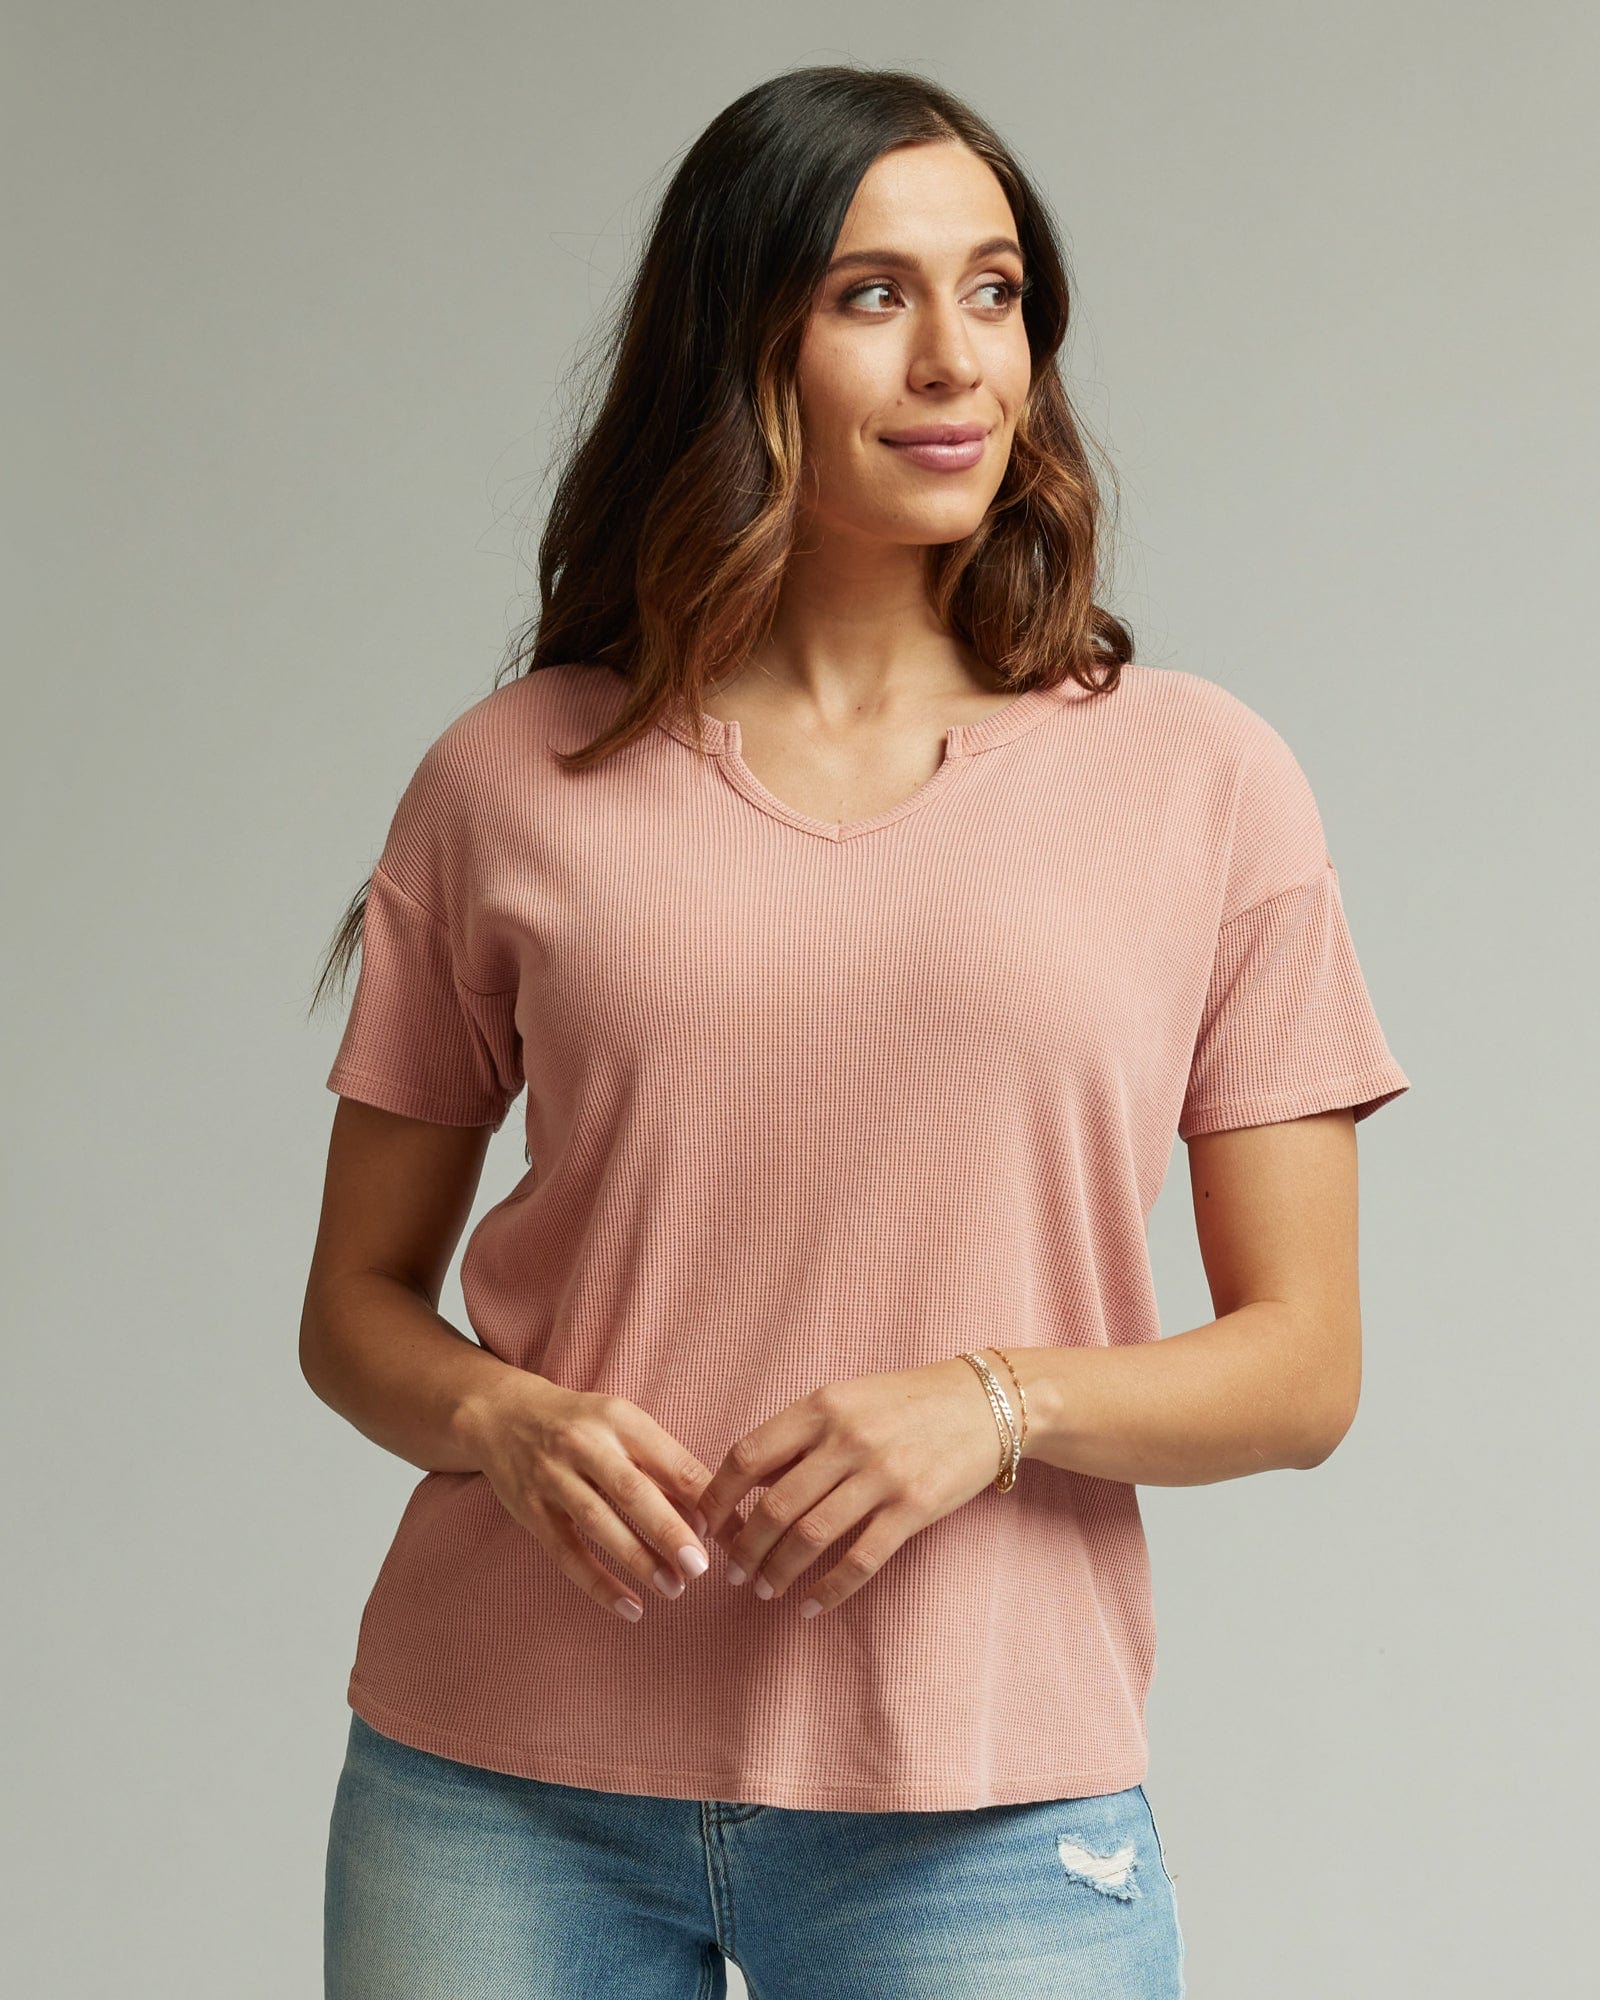 Woman in a pink, short sleeve top